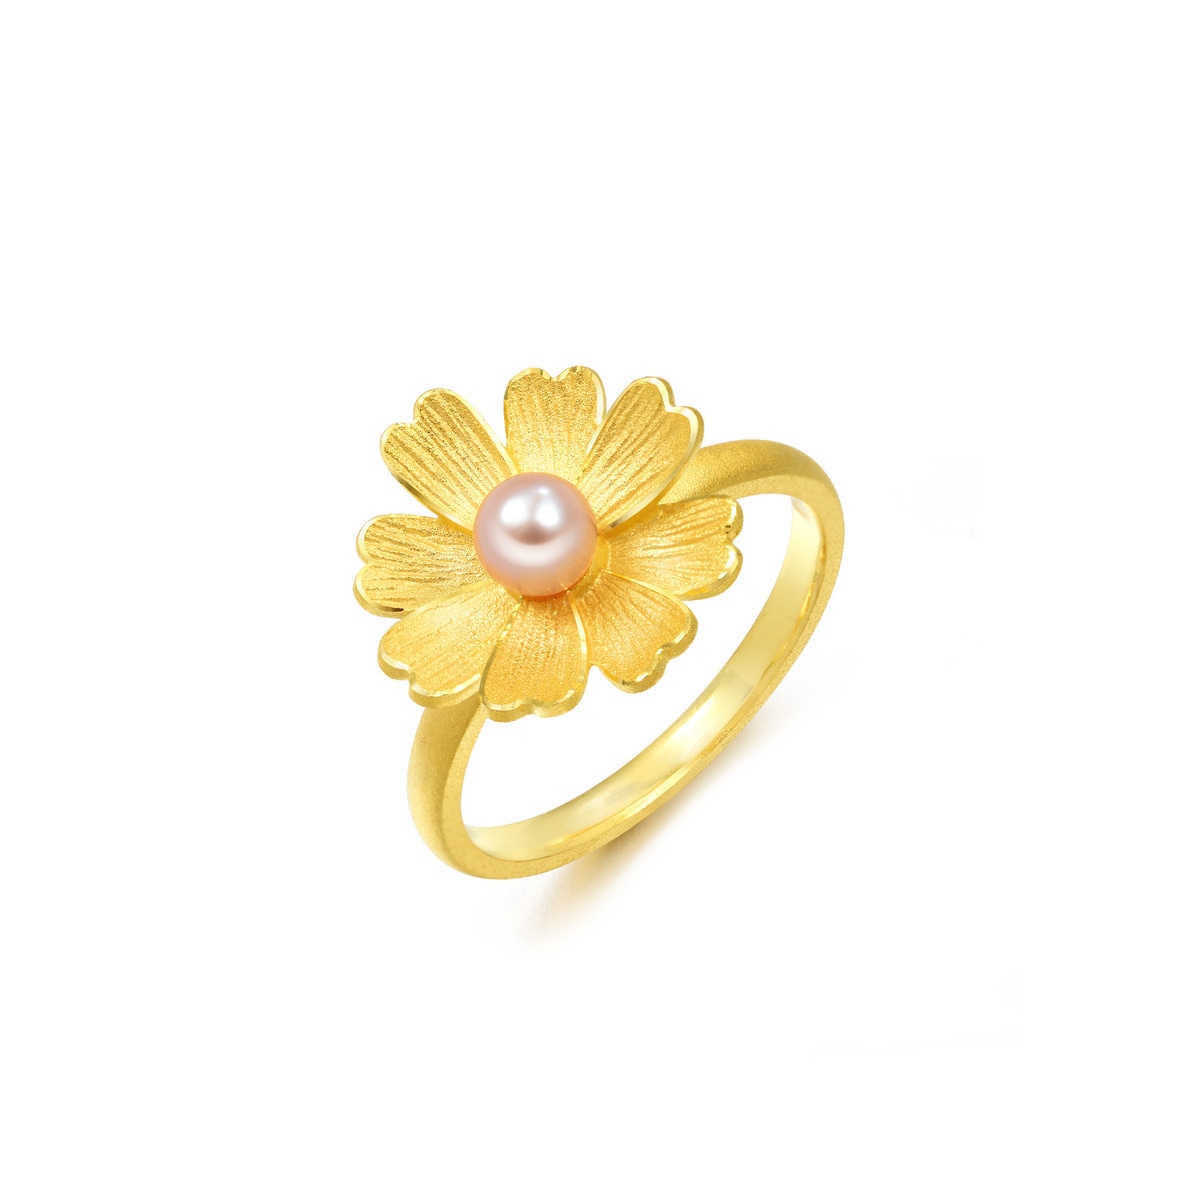 Cultural Blessings 999.9 Gold Ring - 89694R | Chow Sang Sang Jewellery